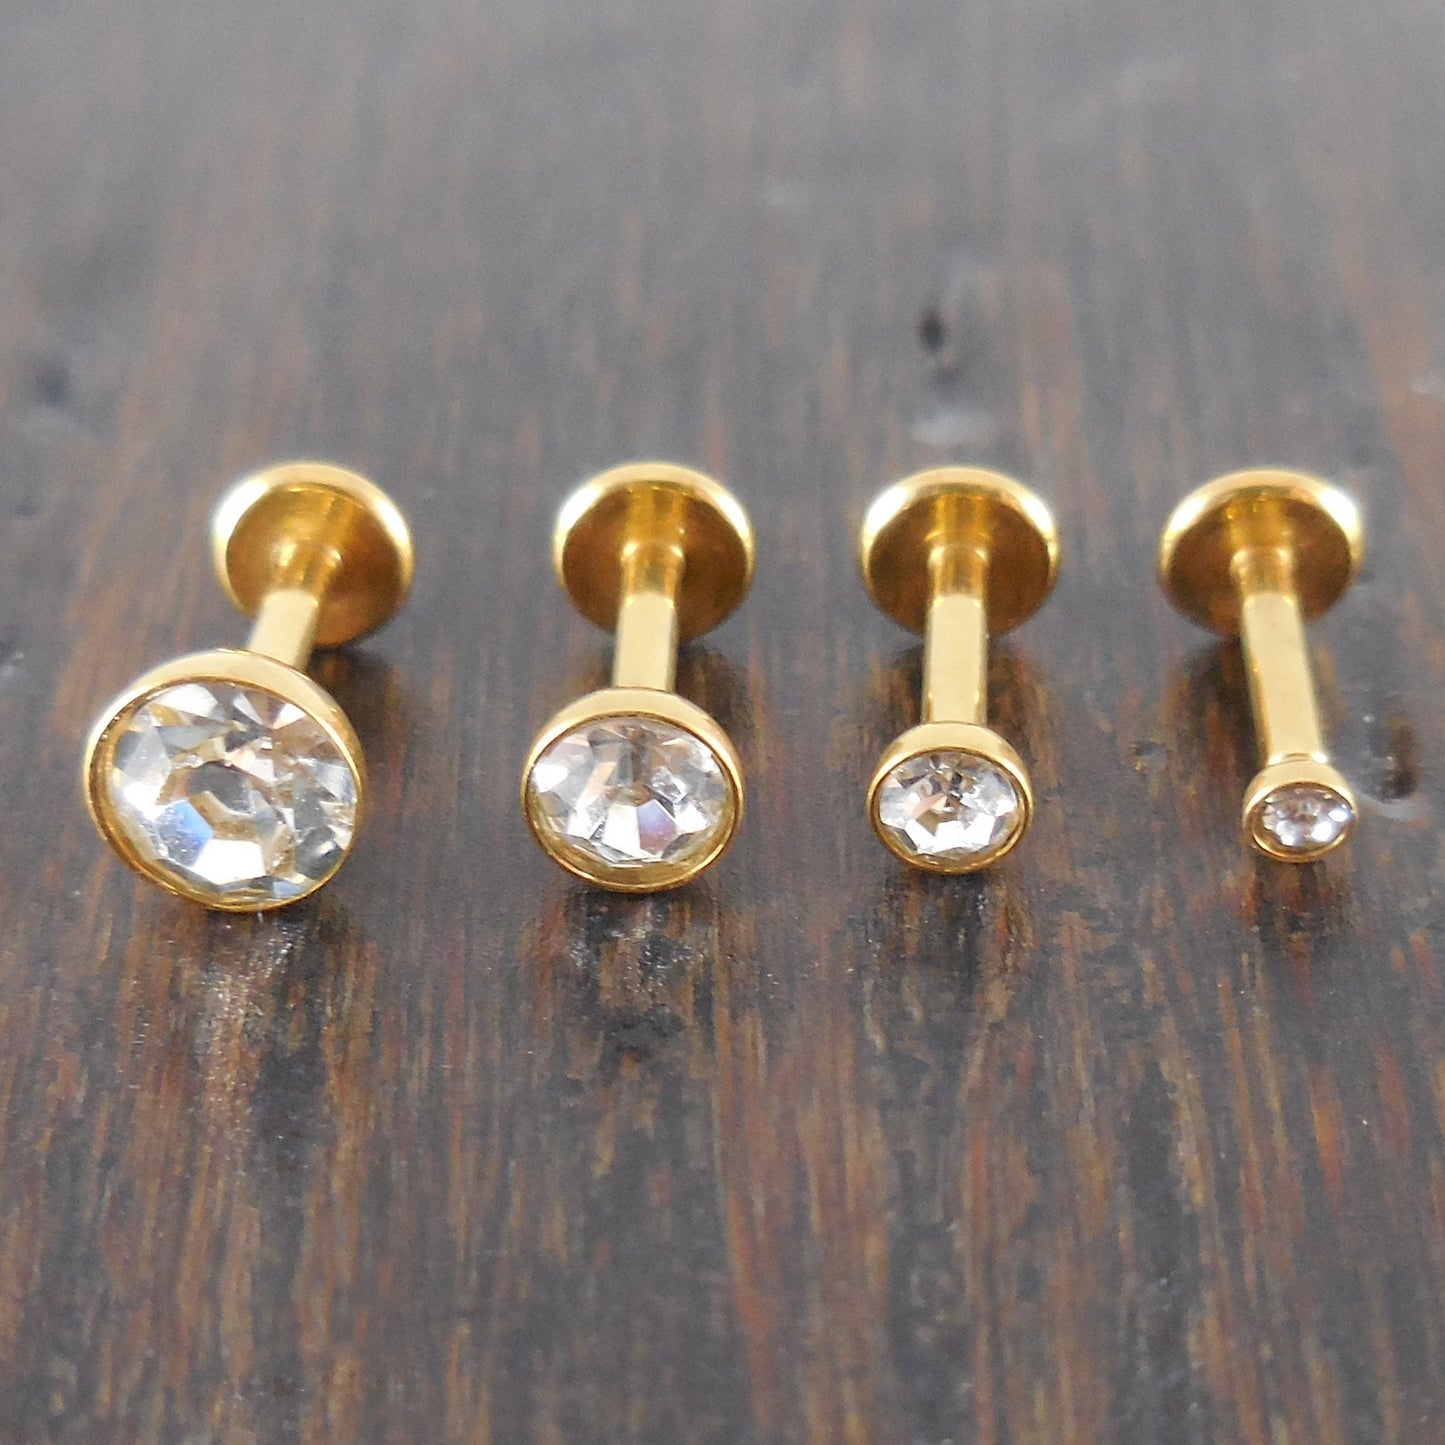 16g 2, 3, 4 or 5mm Clear Cubic Zirconia 6mm or 8mm Thread less Gold Tone Push Pin Triple Forward Helix Earring Cartilage Labret Nose Ring